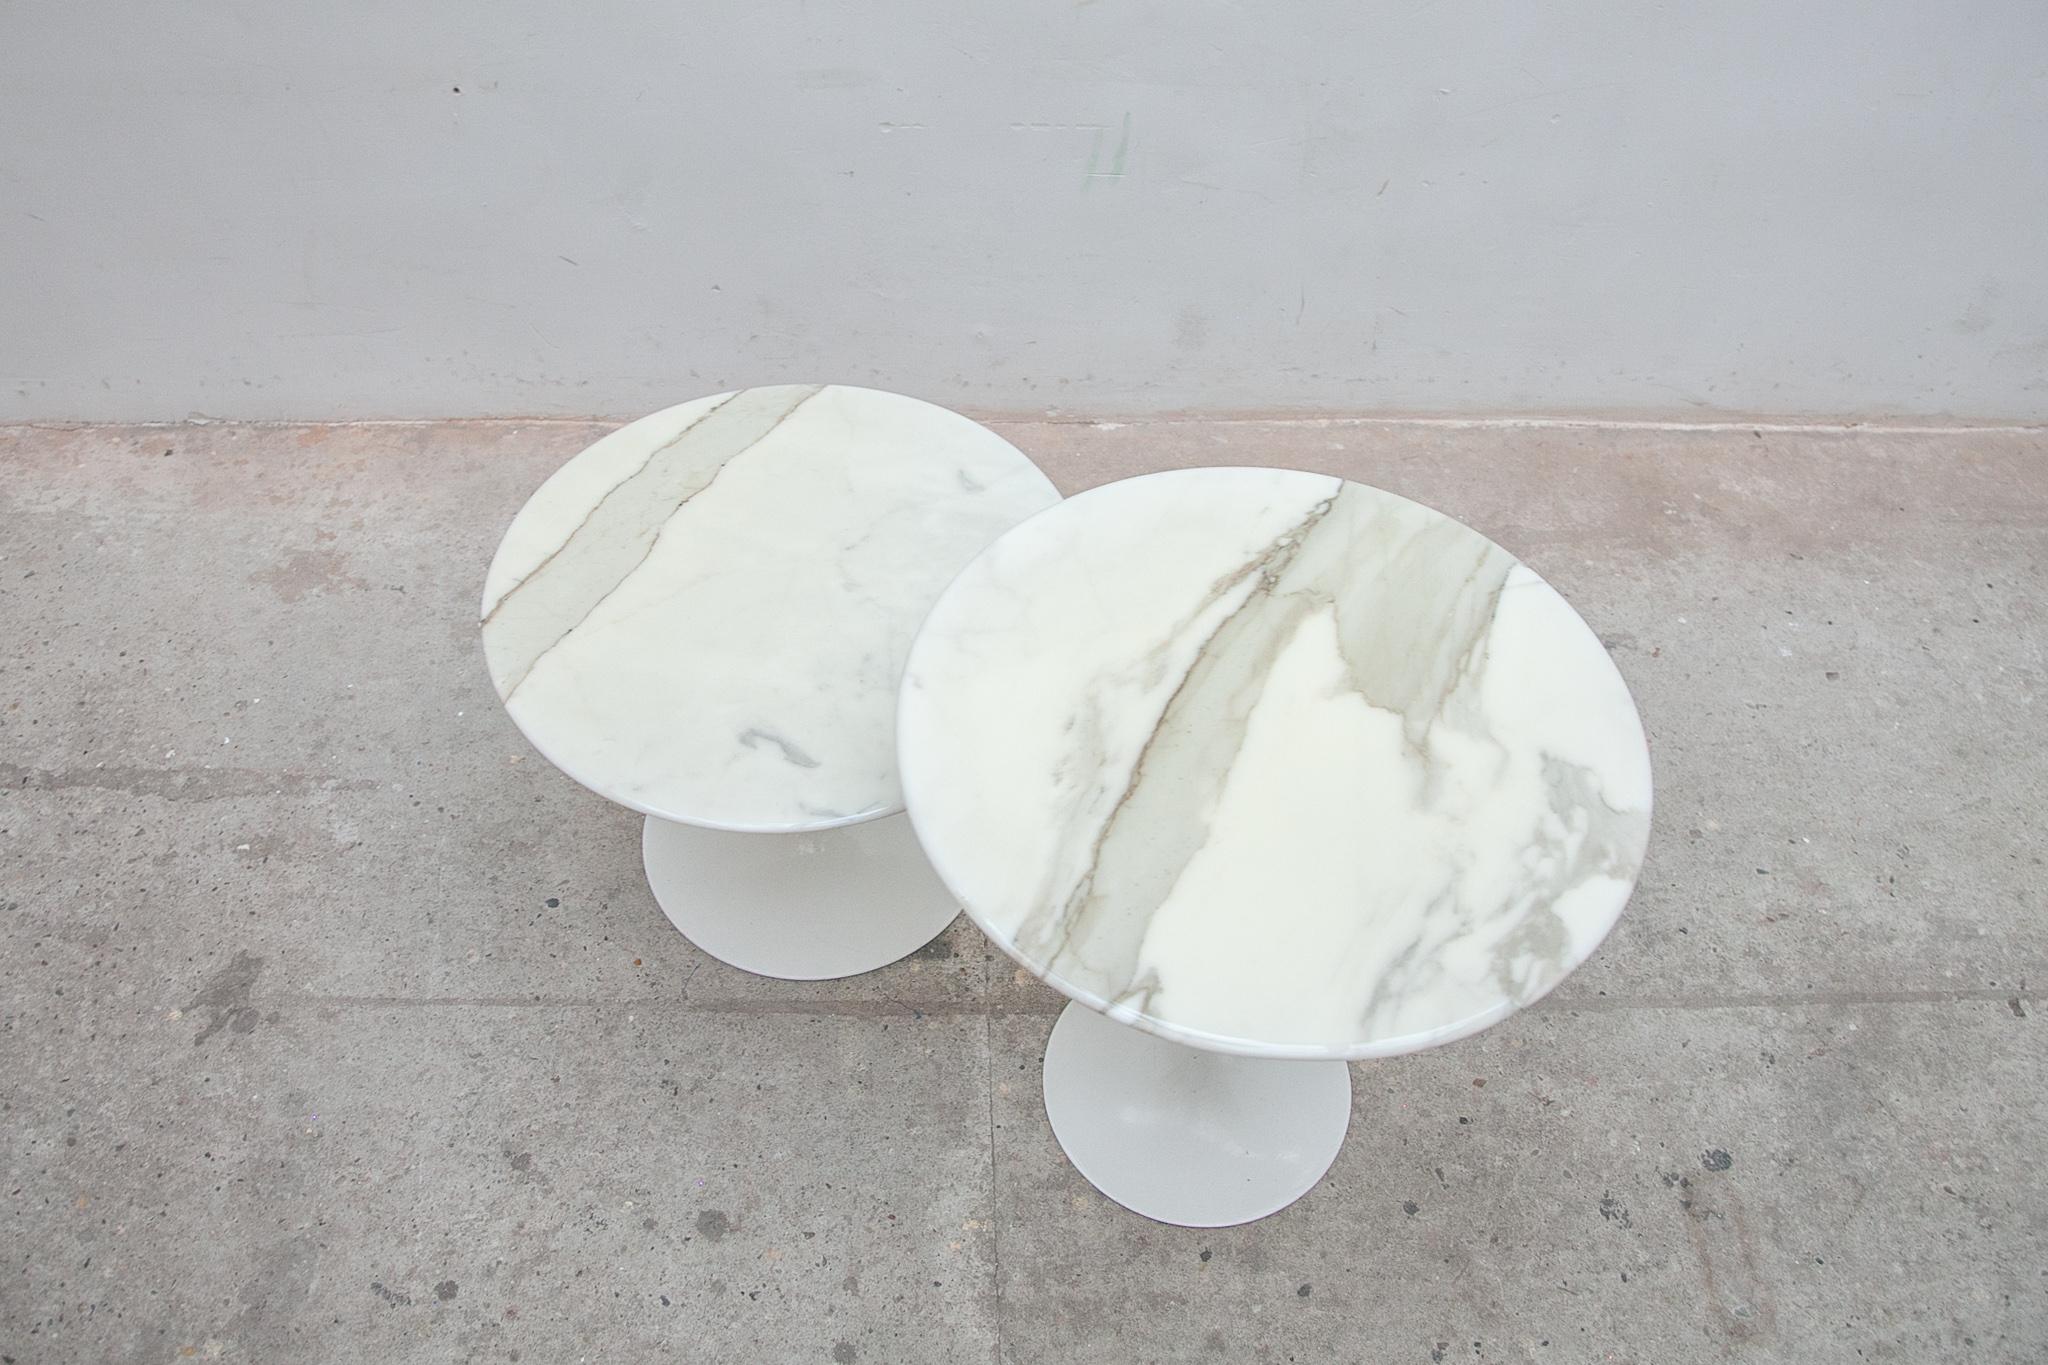 Mid-Century Modern Set of Two Eero Saarinen Sofa Side Tables in White Marble for Knoll, Labeled